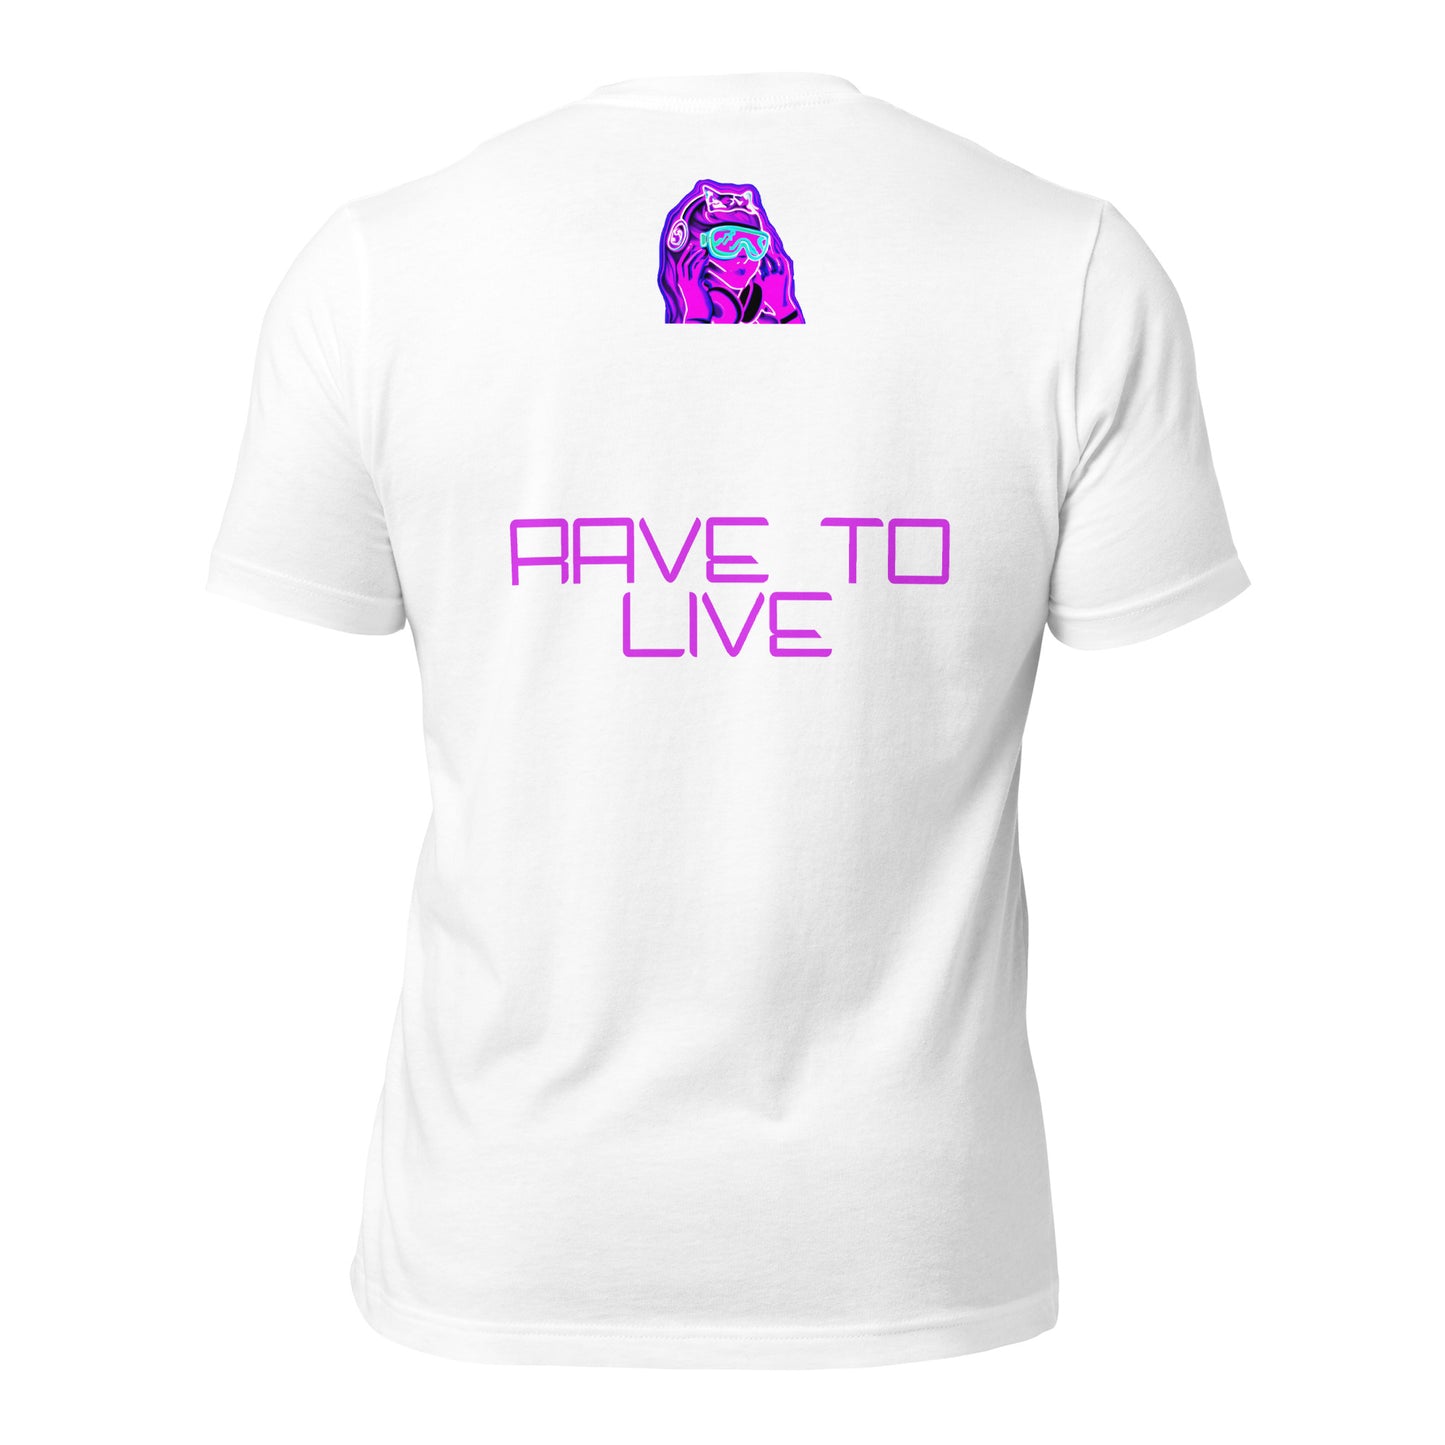 "Live To Rave, Rave To Live" Unisex T-shirt